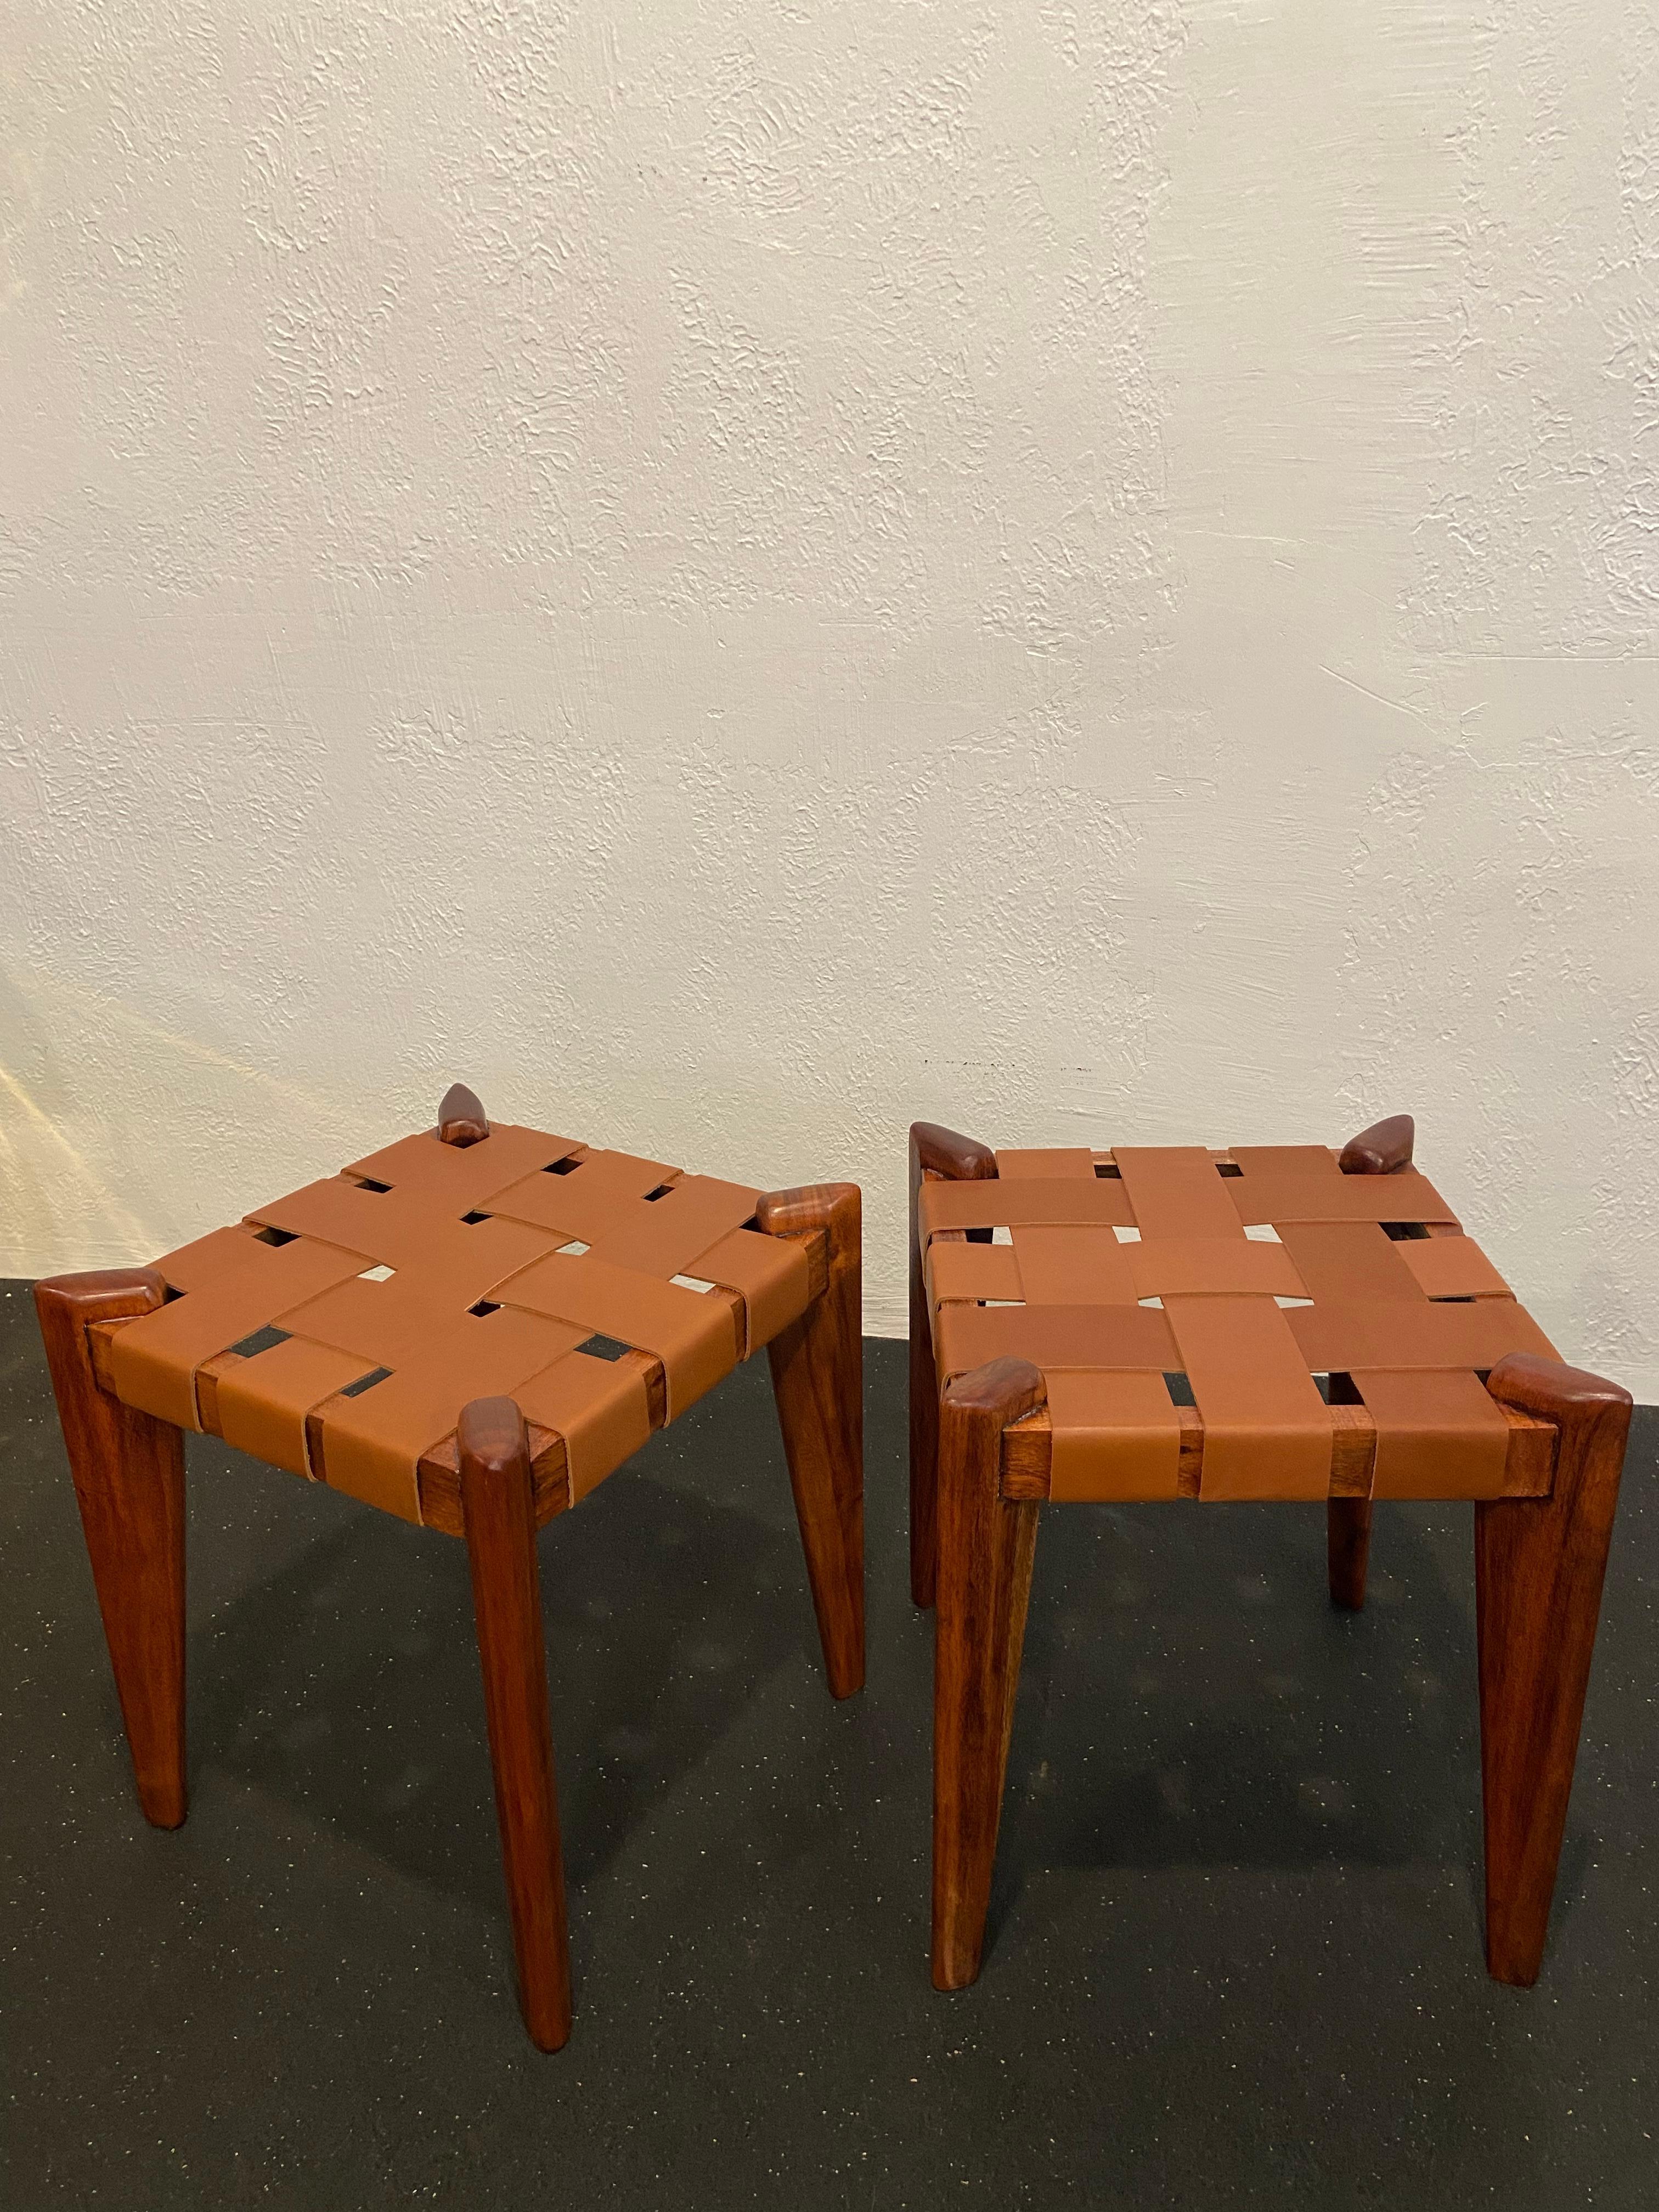 Edmond Spence Woven Leather Stools-a Pair For Sale 3